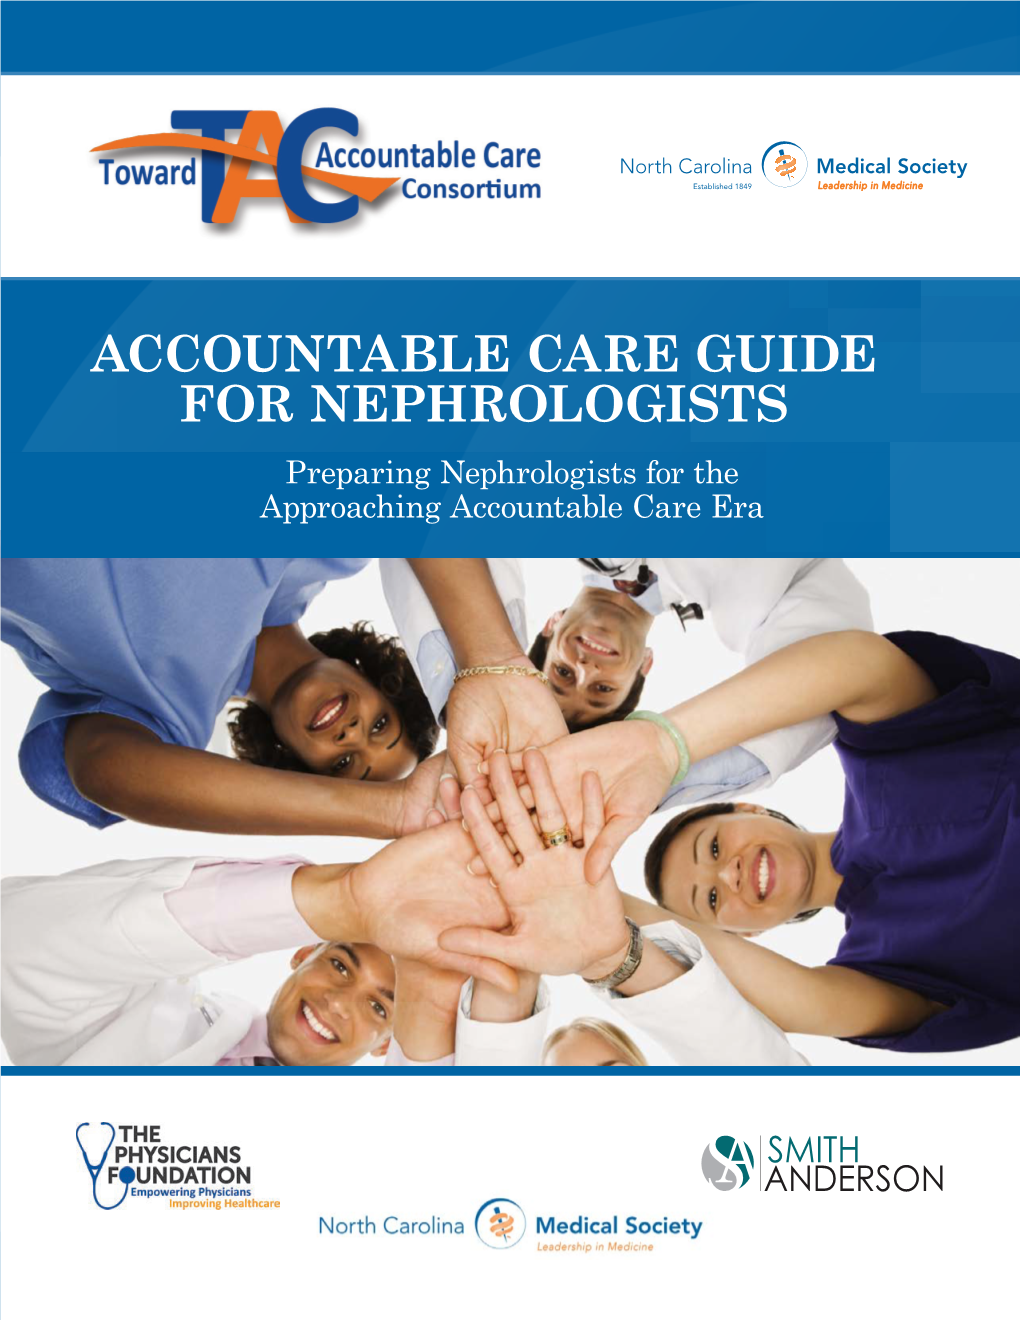 Accountable Care Guide for Nephrologists